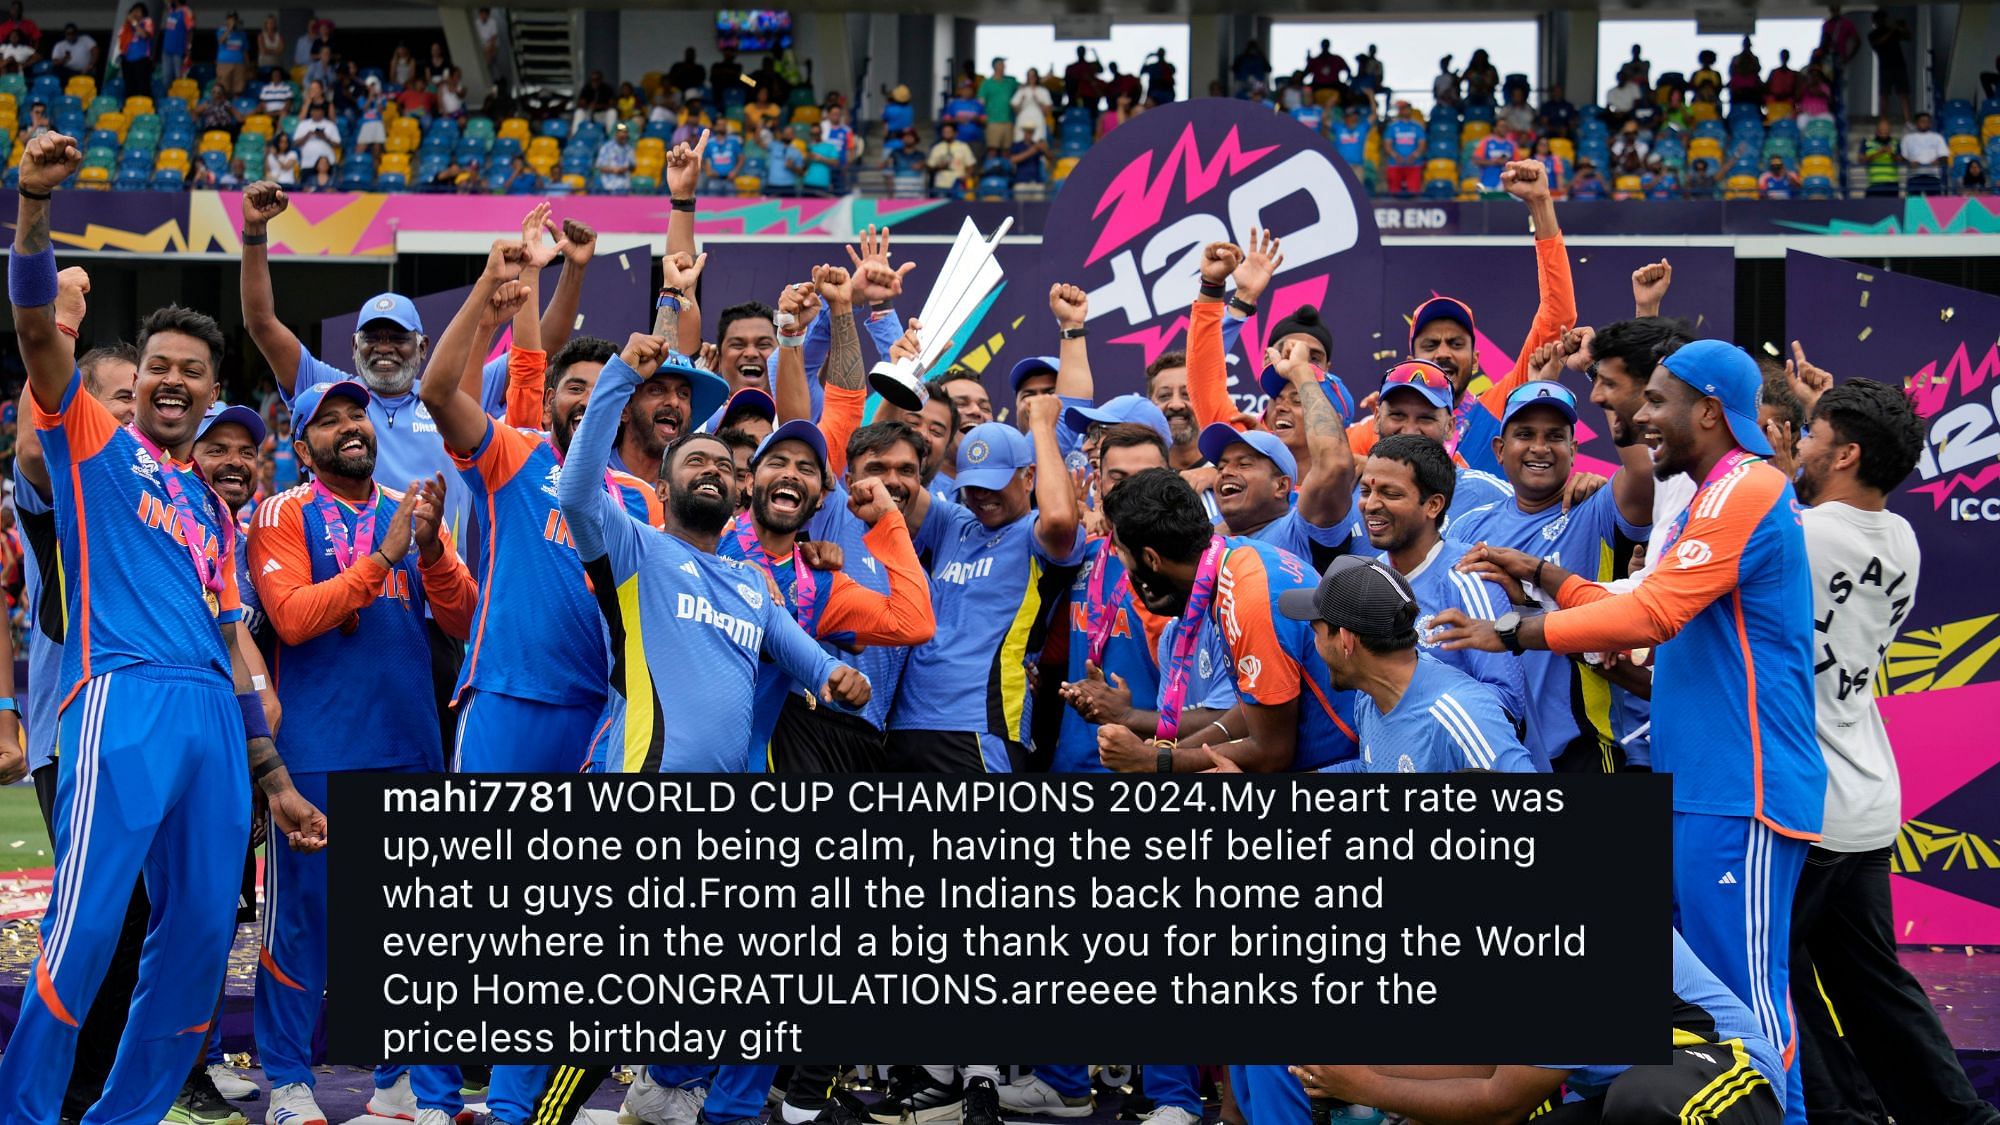 <div class="paragraphs"><p><a href="https://www.thequint.com/topic/ms-dhoni">MS Dhoni</a>, who captained India to 2007 Men’s T20 World Cup triumph in South Africa, congratulated the Rohit Sharma-led side</p></div>